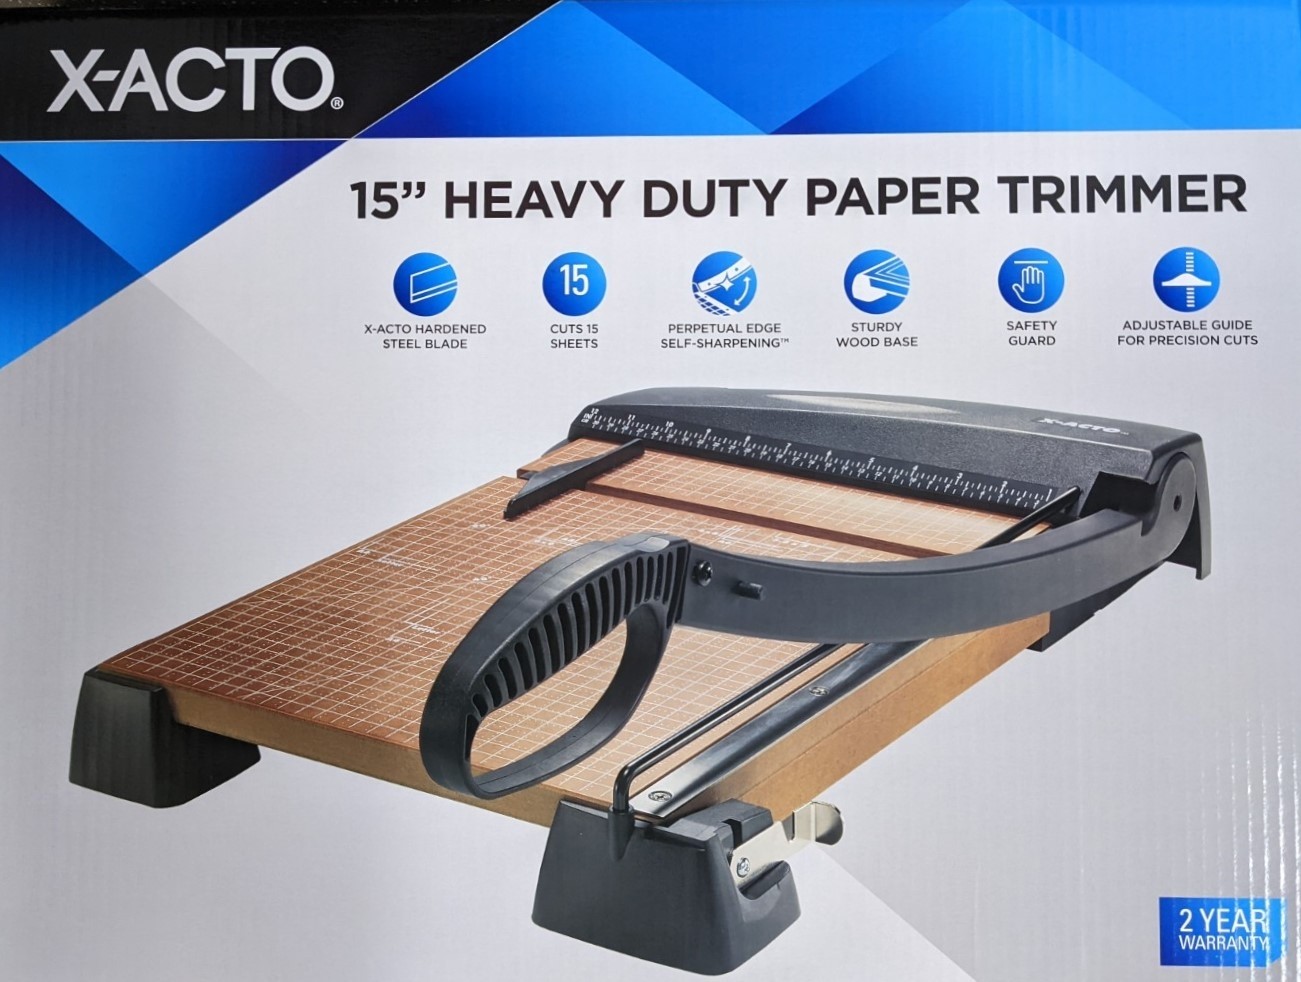 NEW X-ACTO 15" Heavy Duty Paper Trimmer